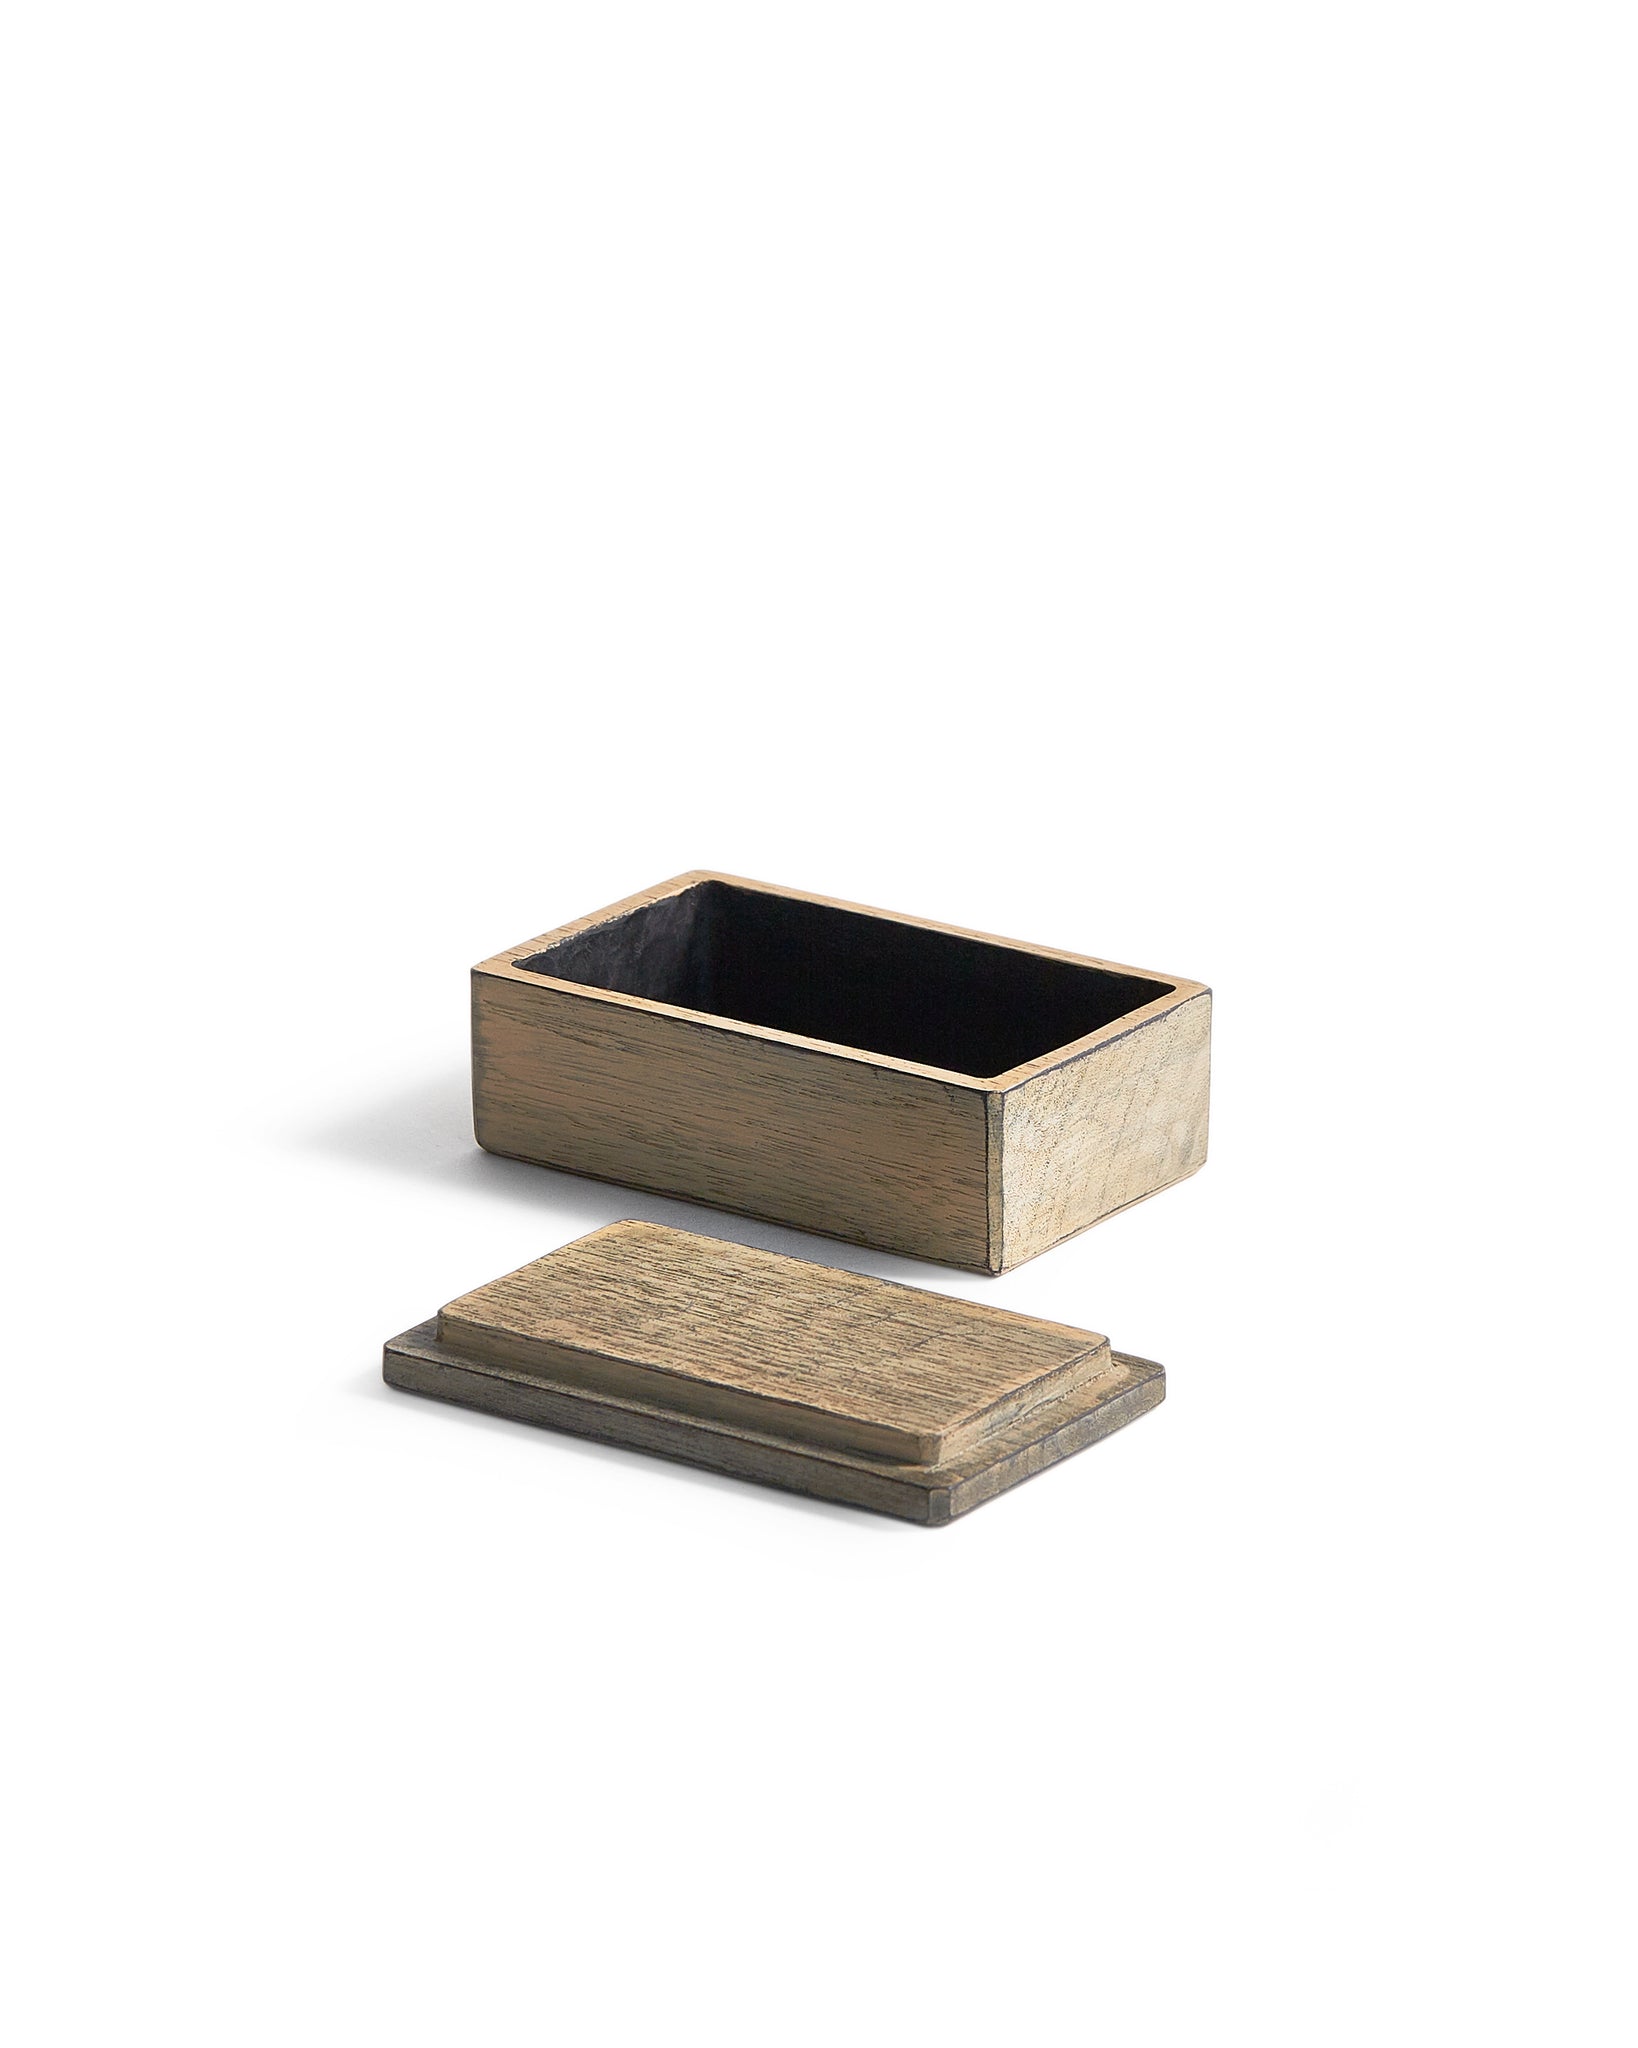 Angled top view of open Usuzumi Thin Lid Box by Ryuji Mitani against white background.